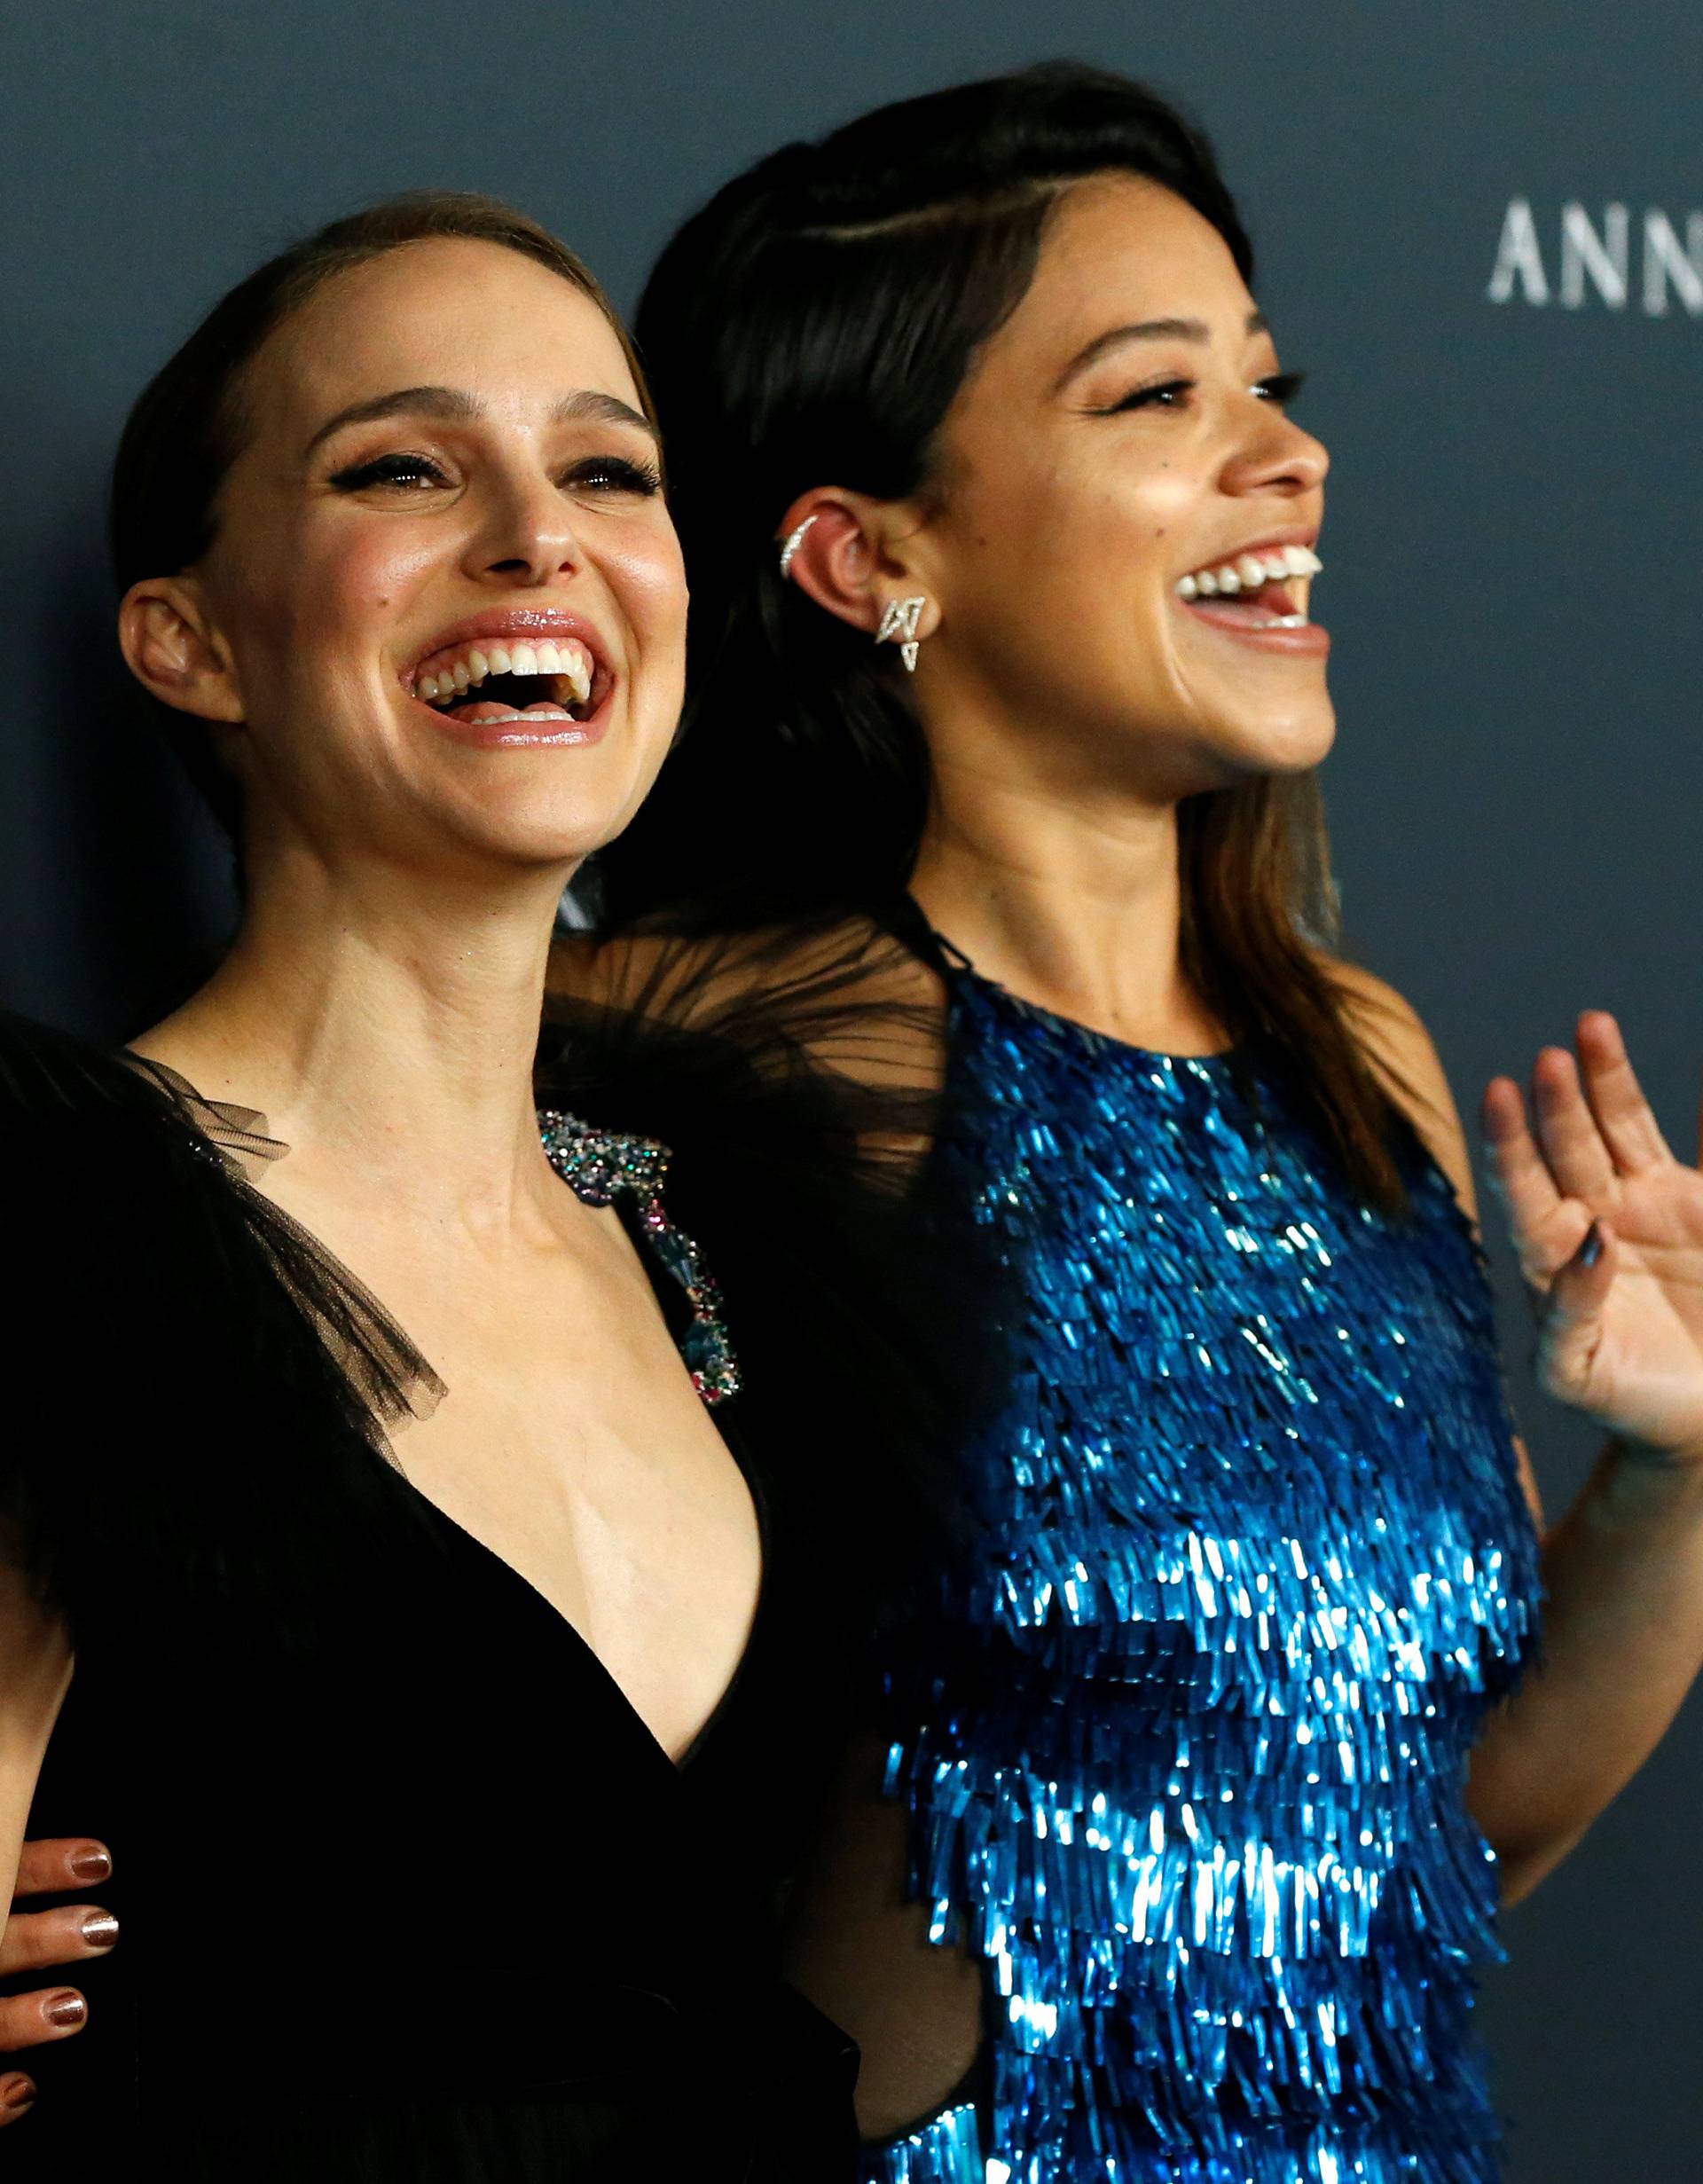 Cast members Portman and Rodriguez pose at the premiere for "Annihilation" in Los Angeles